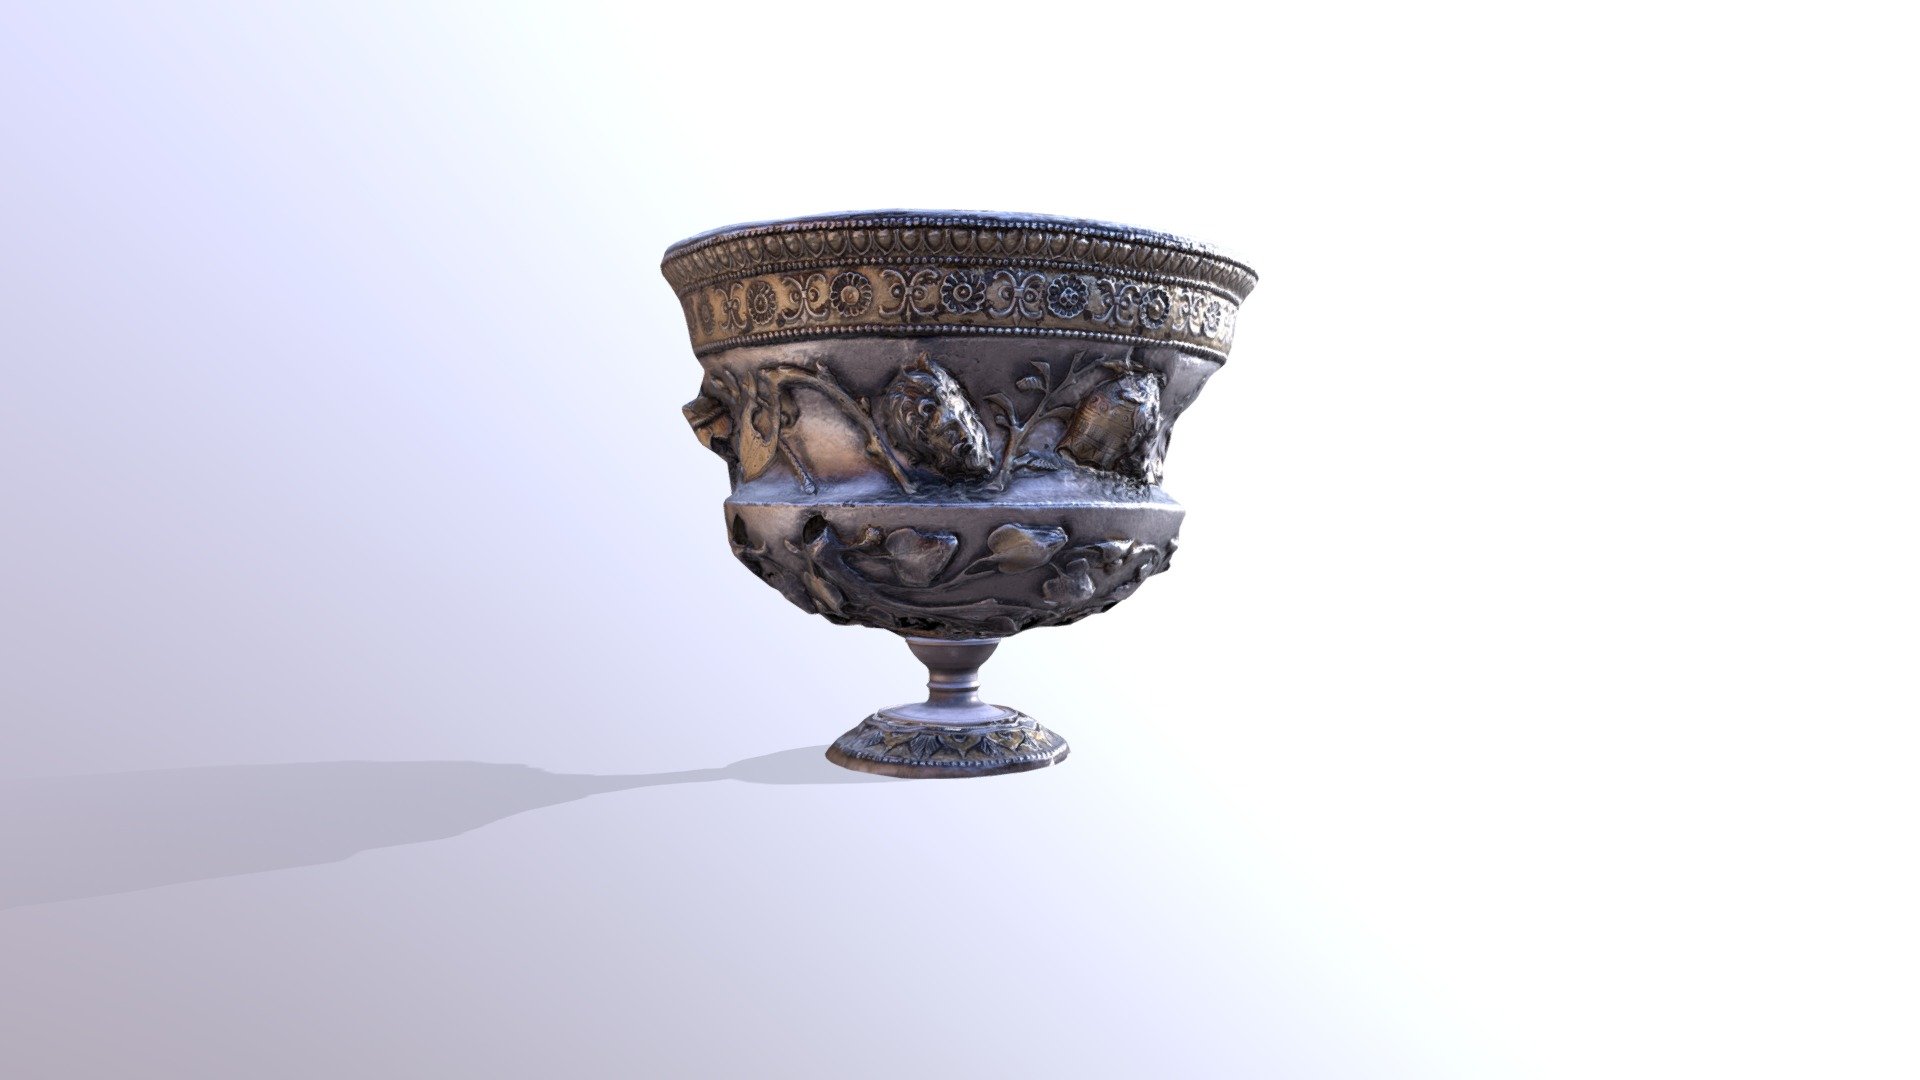 Look at this beautiful roman chalice. It's so shiny! 

We've 3D scanned, refined, textured and optimized this beauty for use in a VR game 3d model